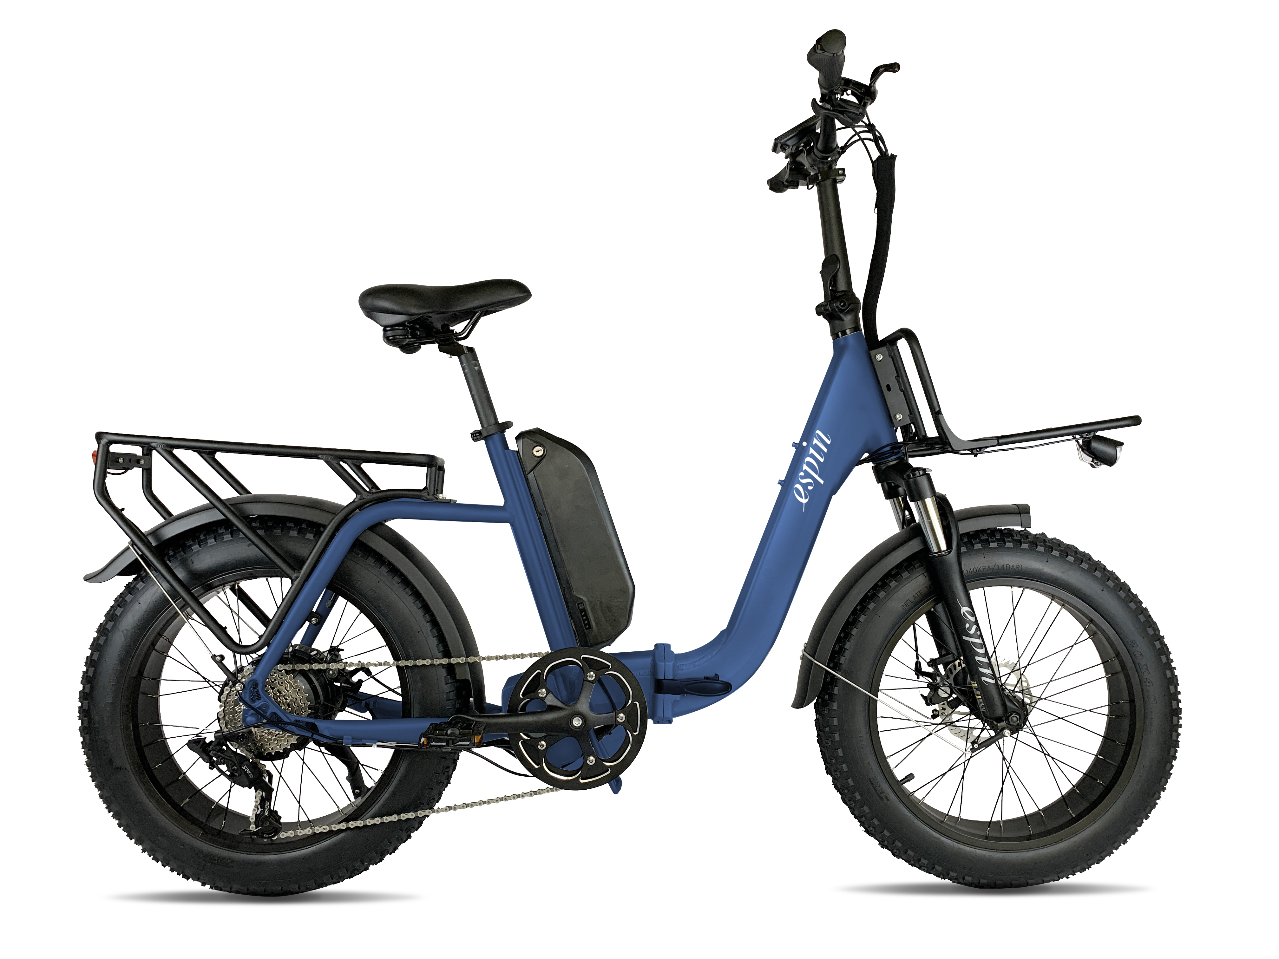 The Espin E-bike Front Rack mounts directly to the frame of Ebikes and provides a flat mounting point for a variety of cargo carrying accessories